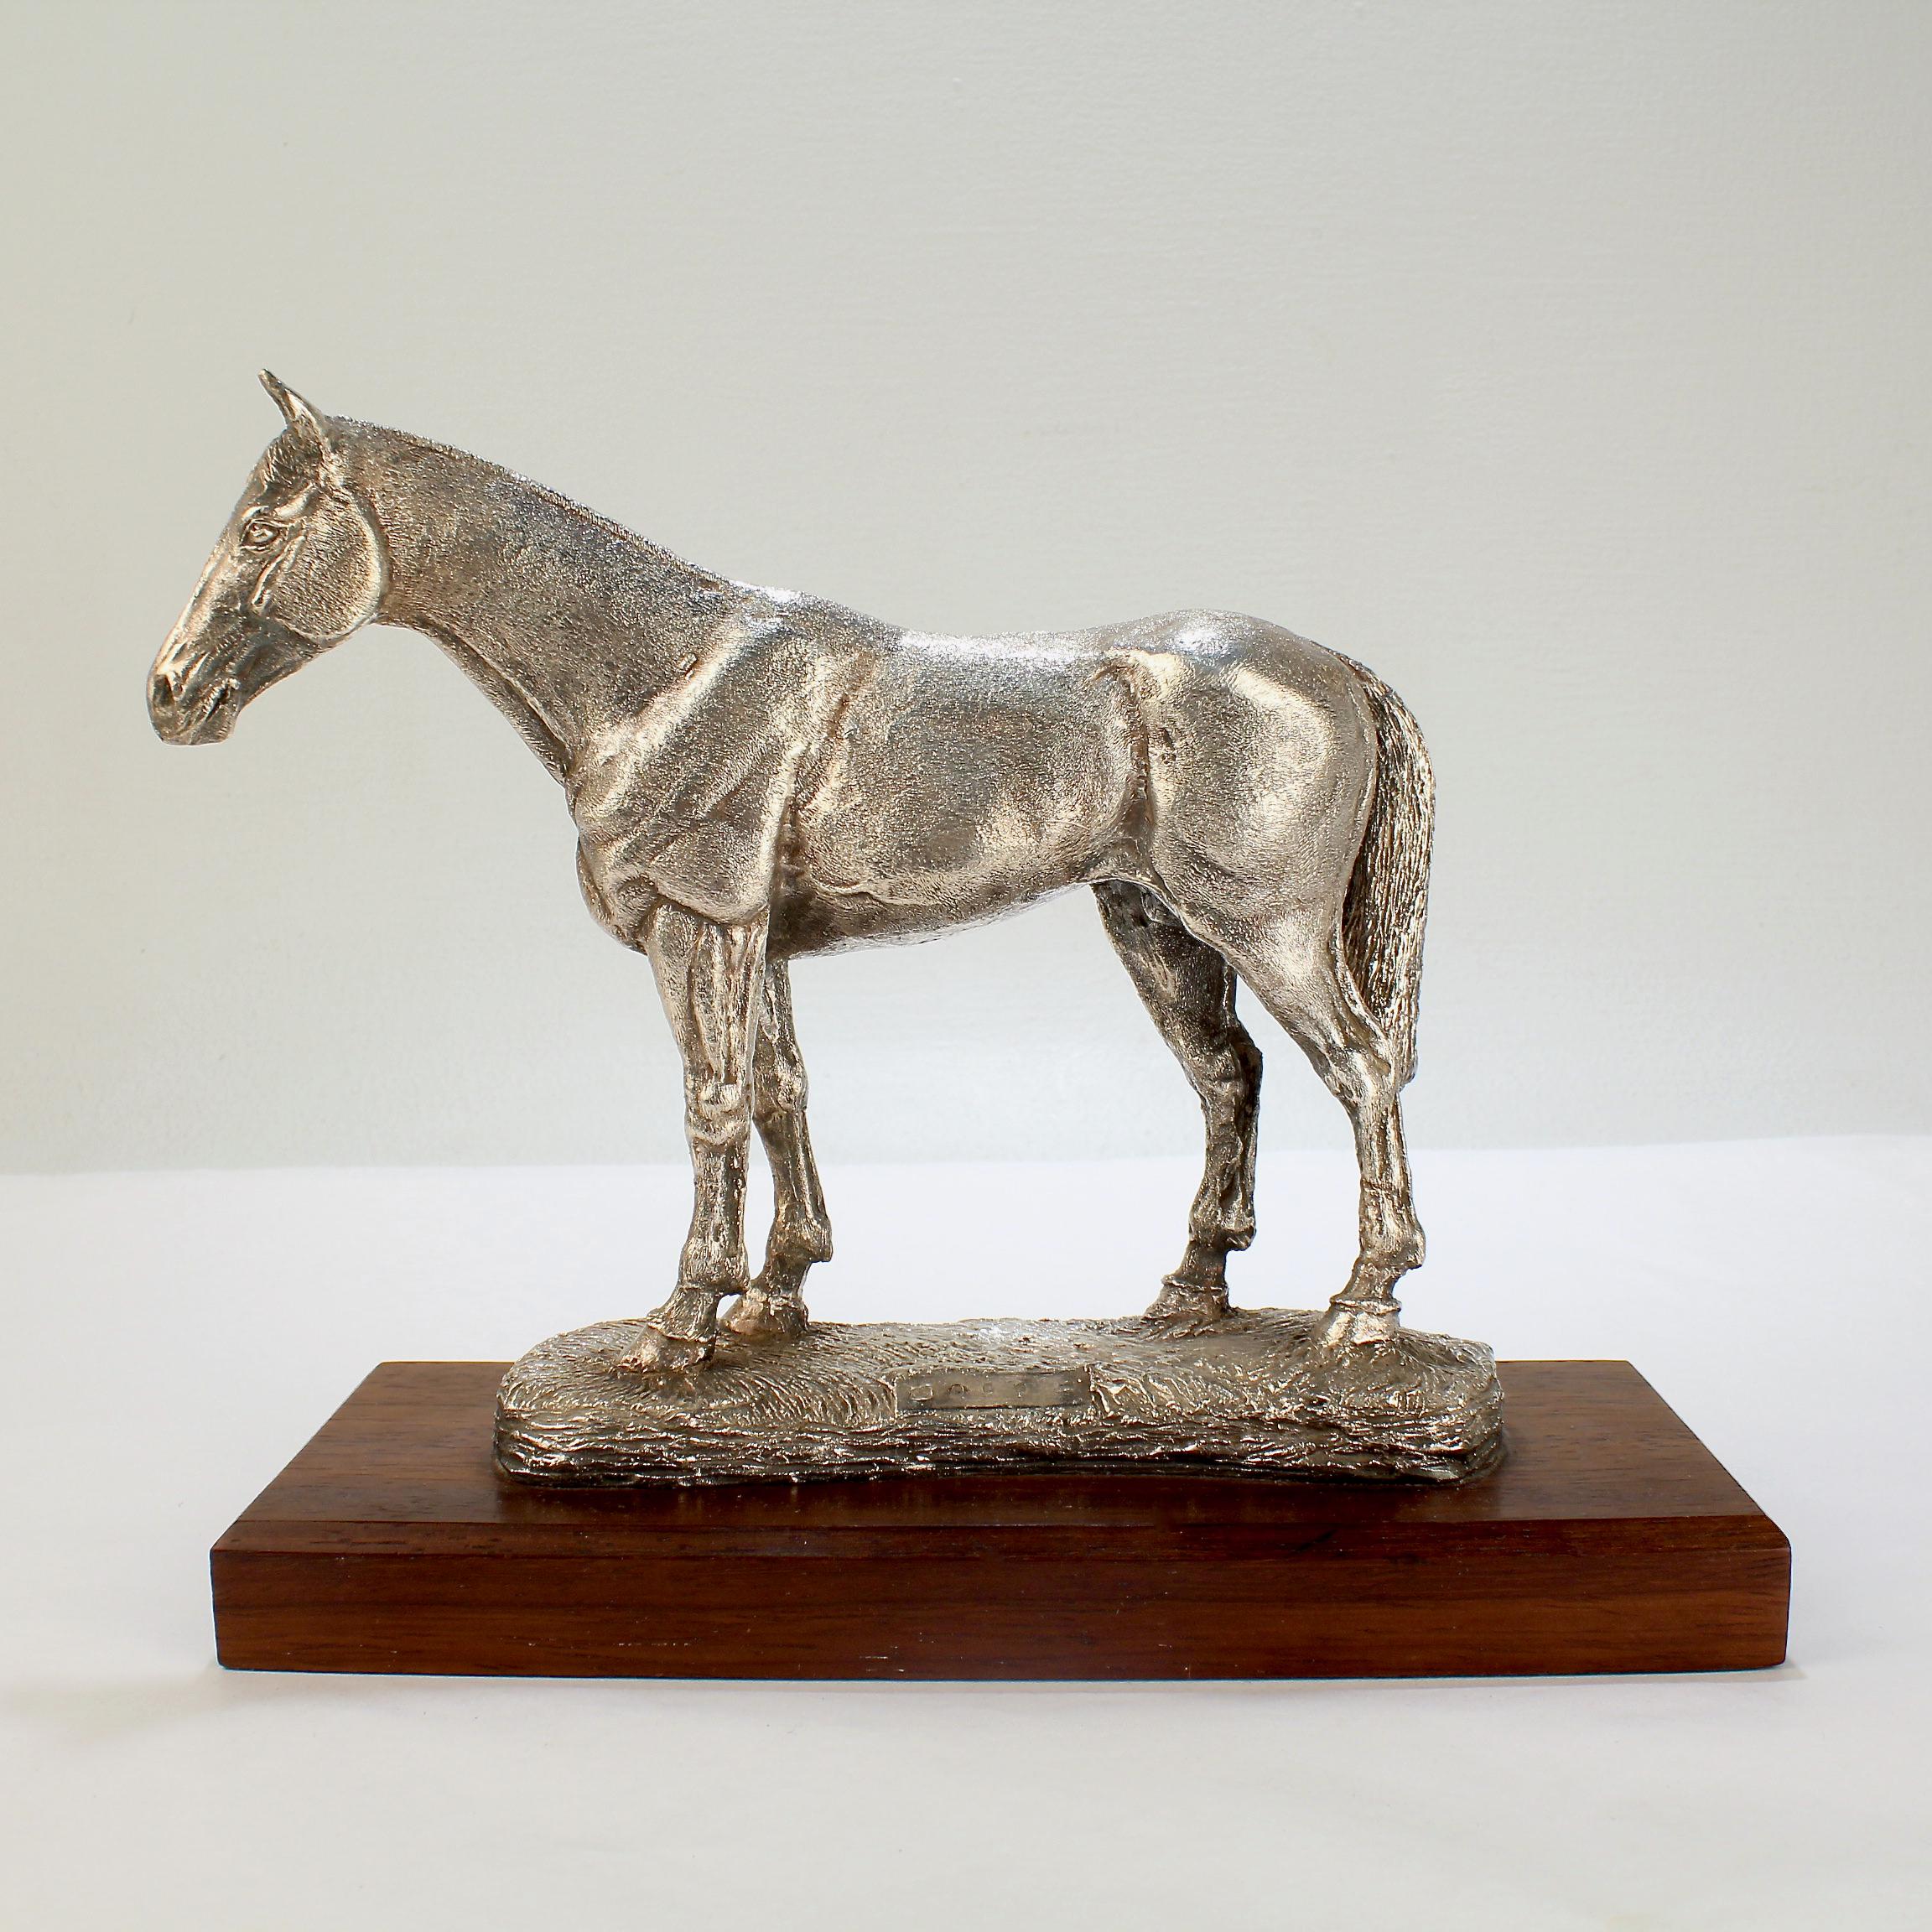 A fine, large Irish horse sculpture.

Modeled as a three-dimensional standing work horse on a wooden plinth. 

Comprised of cement-filled sterling silver.

Marked for the Camelot Silverware Ltd. company, a company known for their fine large-scale